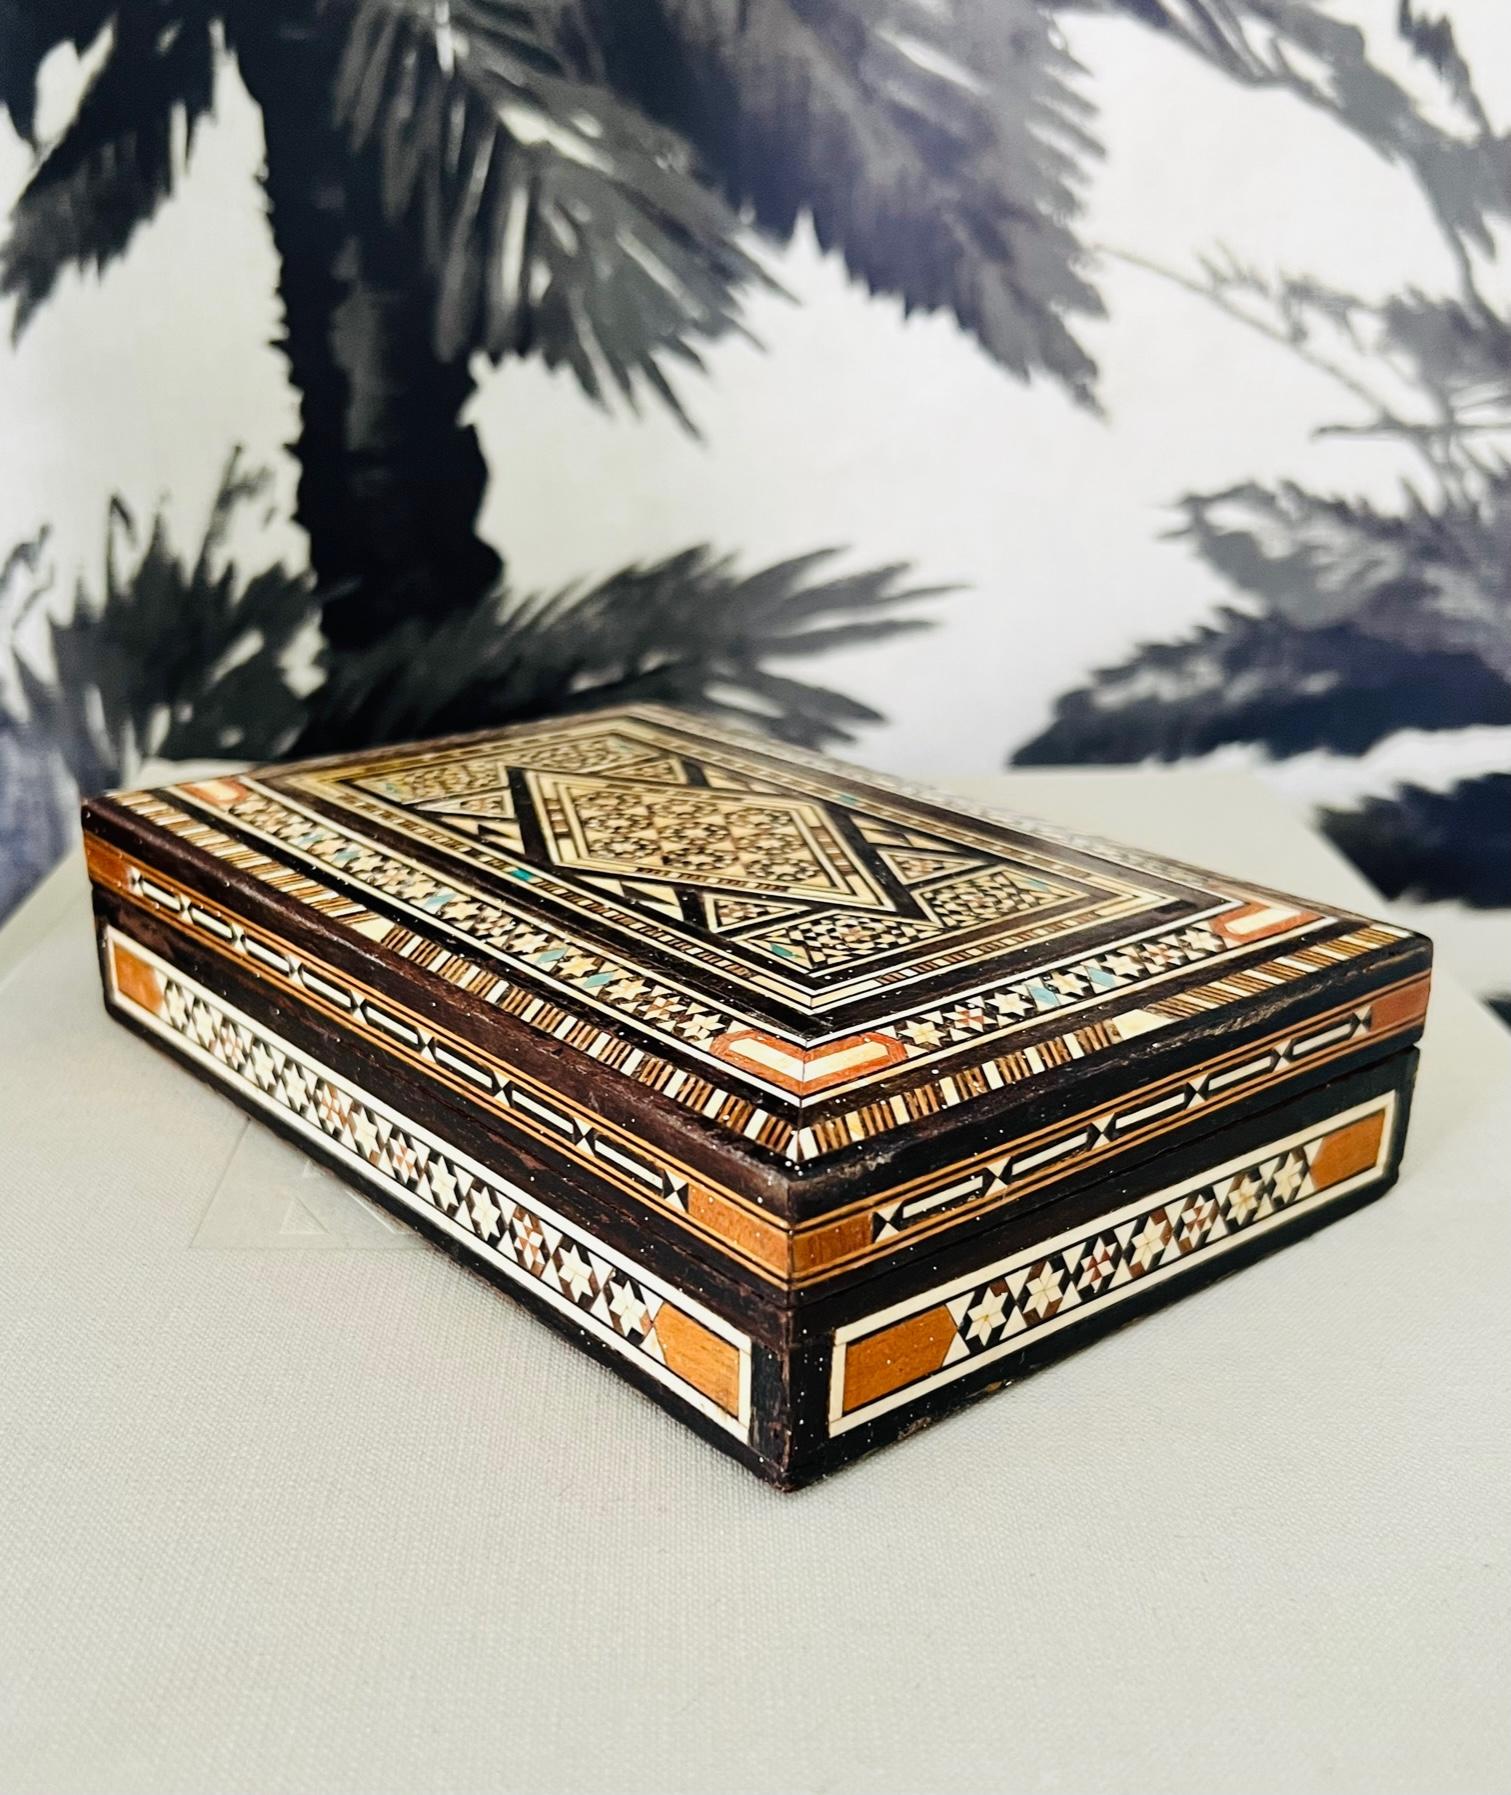 Mid-20th Century Marquetry Wood Box with Mosaic Bone Inlays, Middle East, circa 1940s For Sale